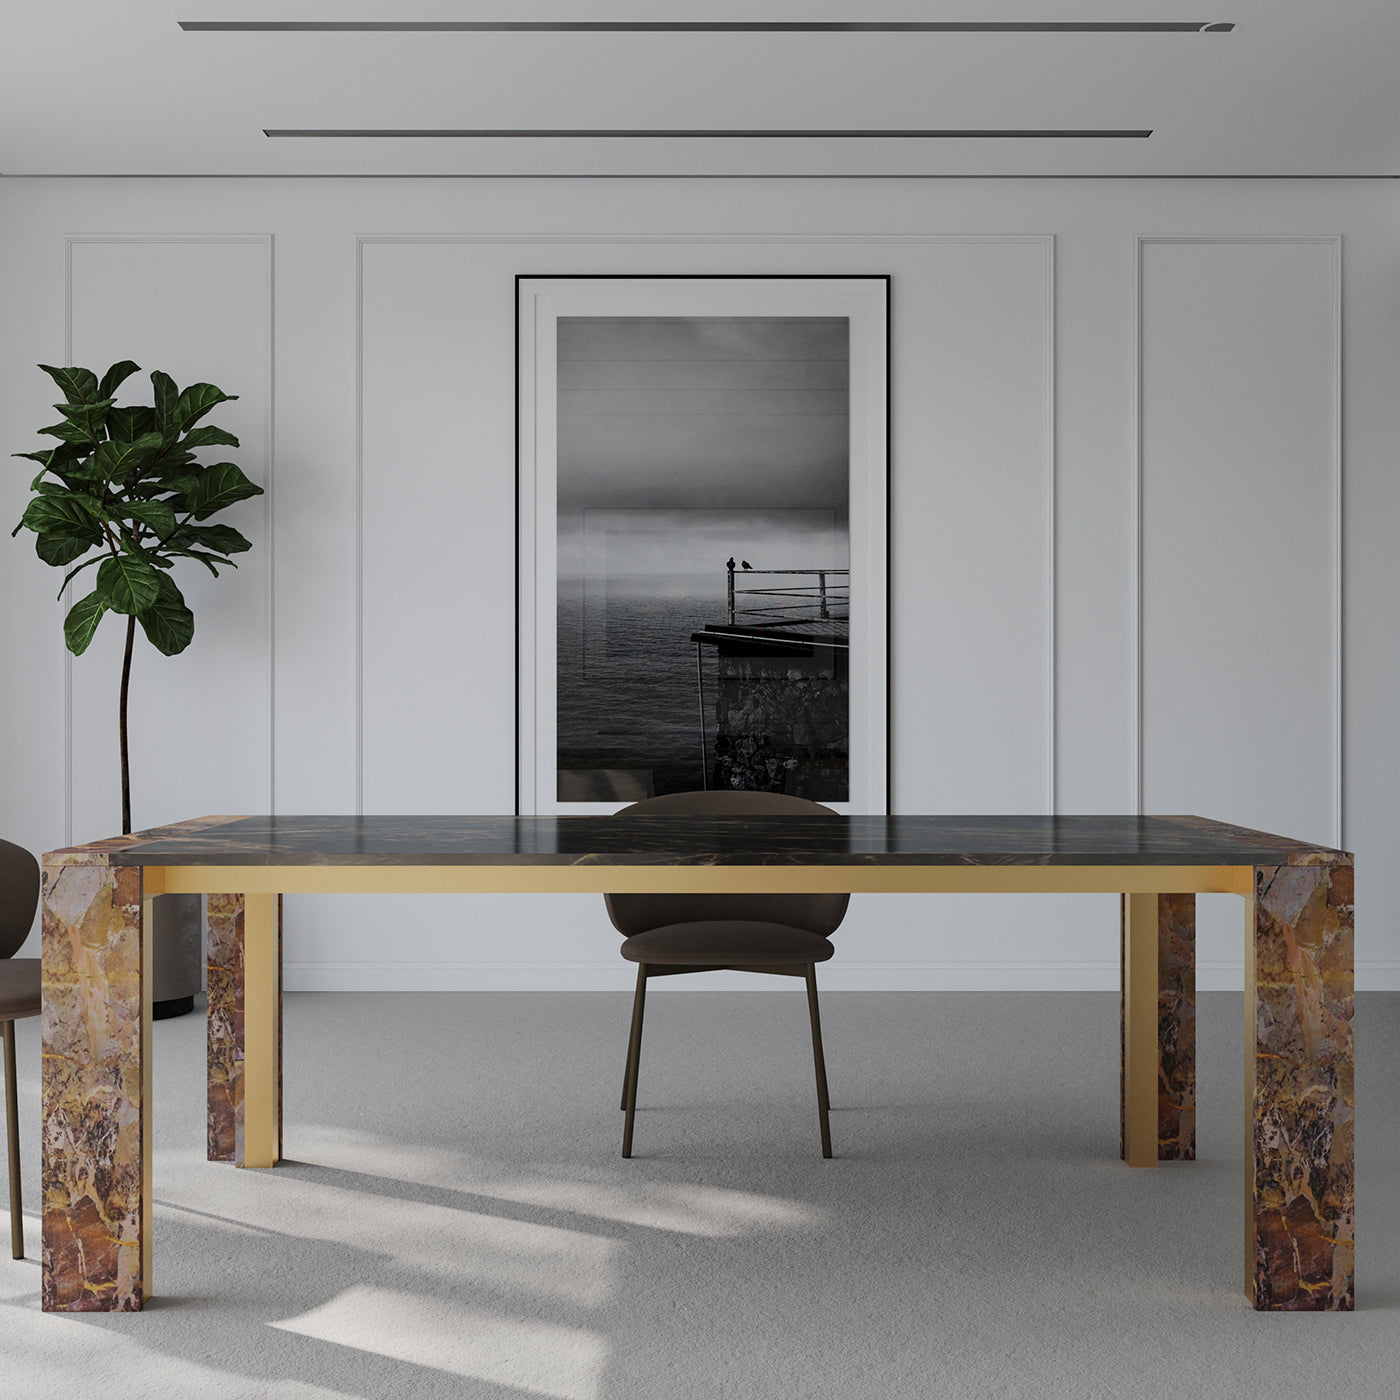 Ilan Sahara Brown Marble Dining Table by Paolo Ciacci - Alternative view 1